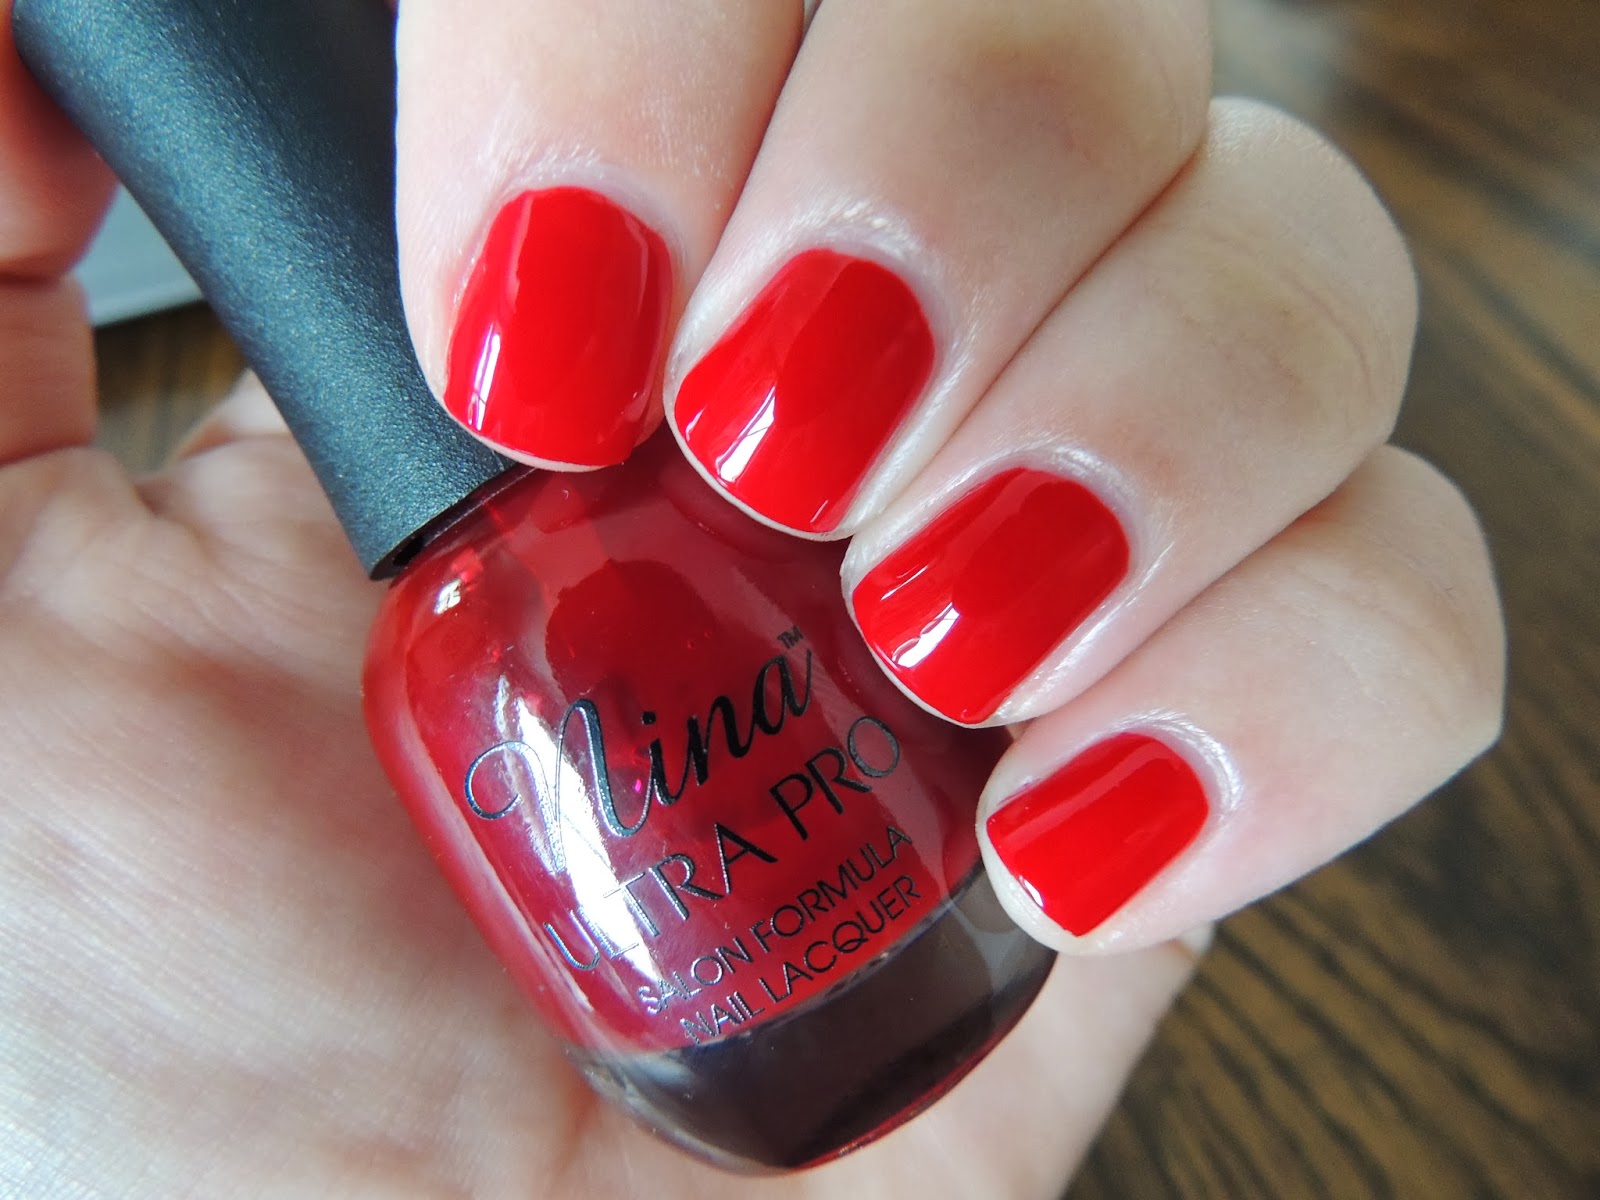 Classic Red Nail Polish Shades for Every Skin Tone - wide 4